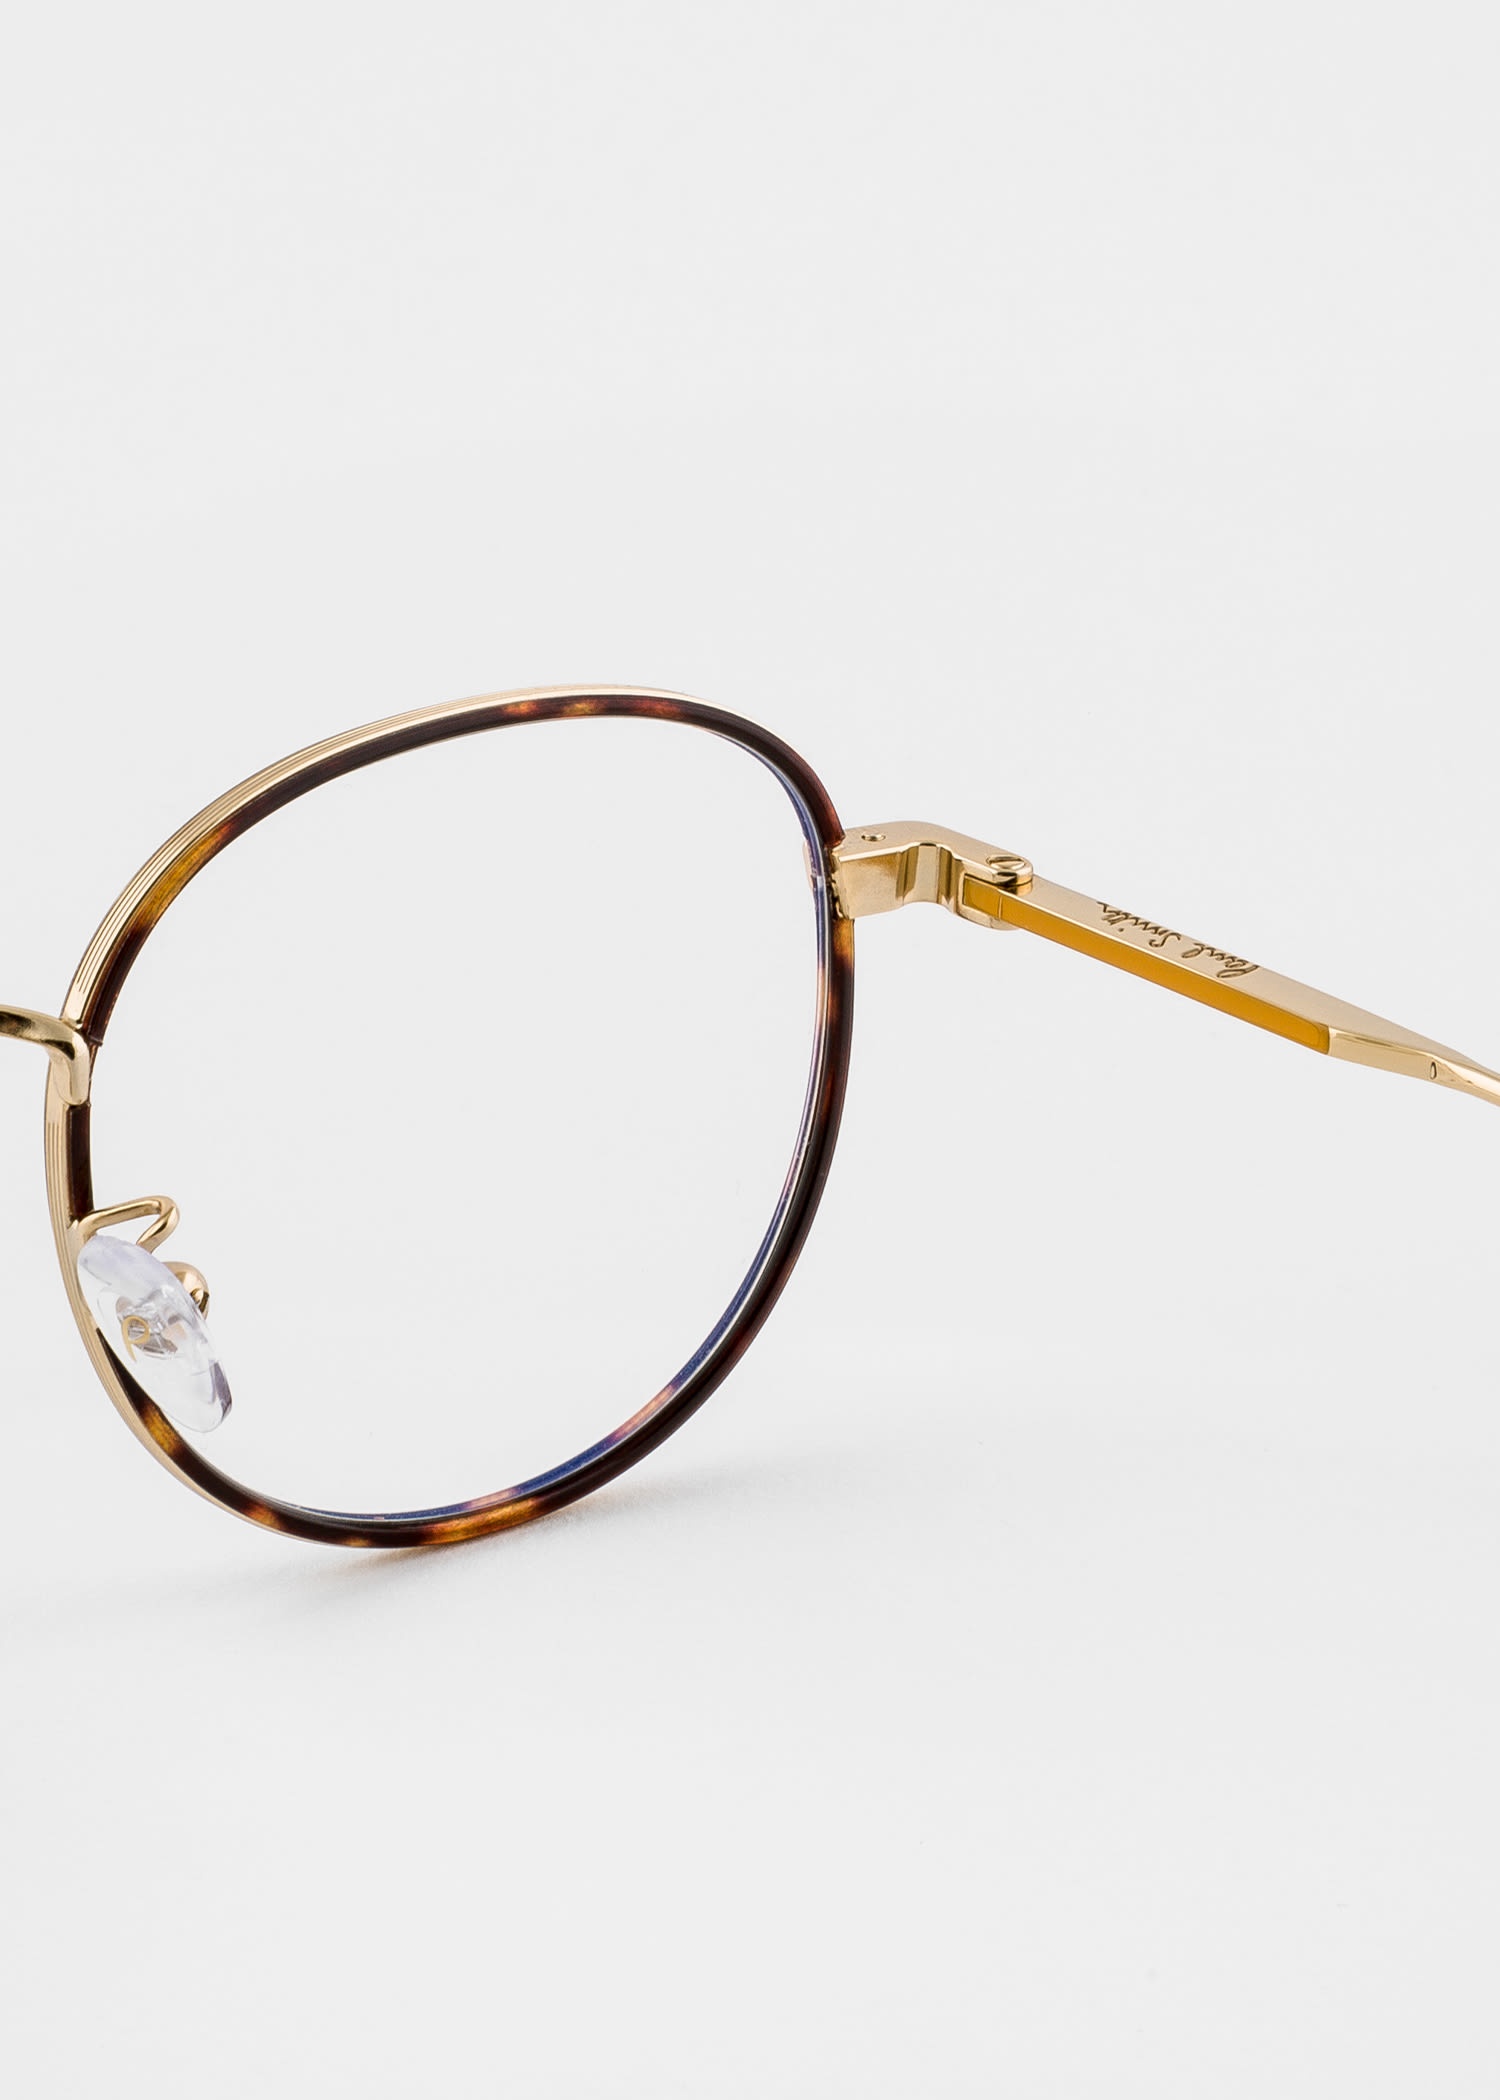 Gold 'Drury' Spectacles - 3